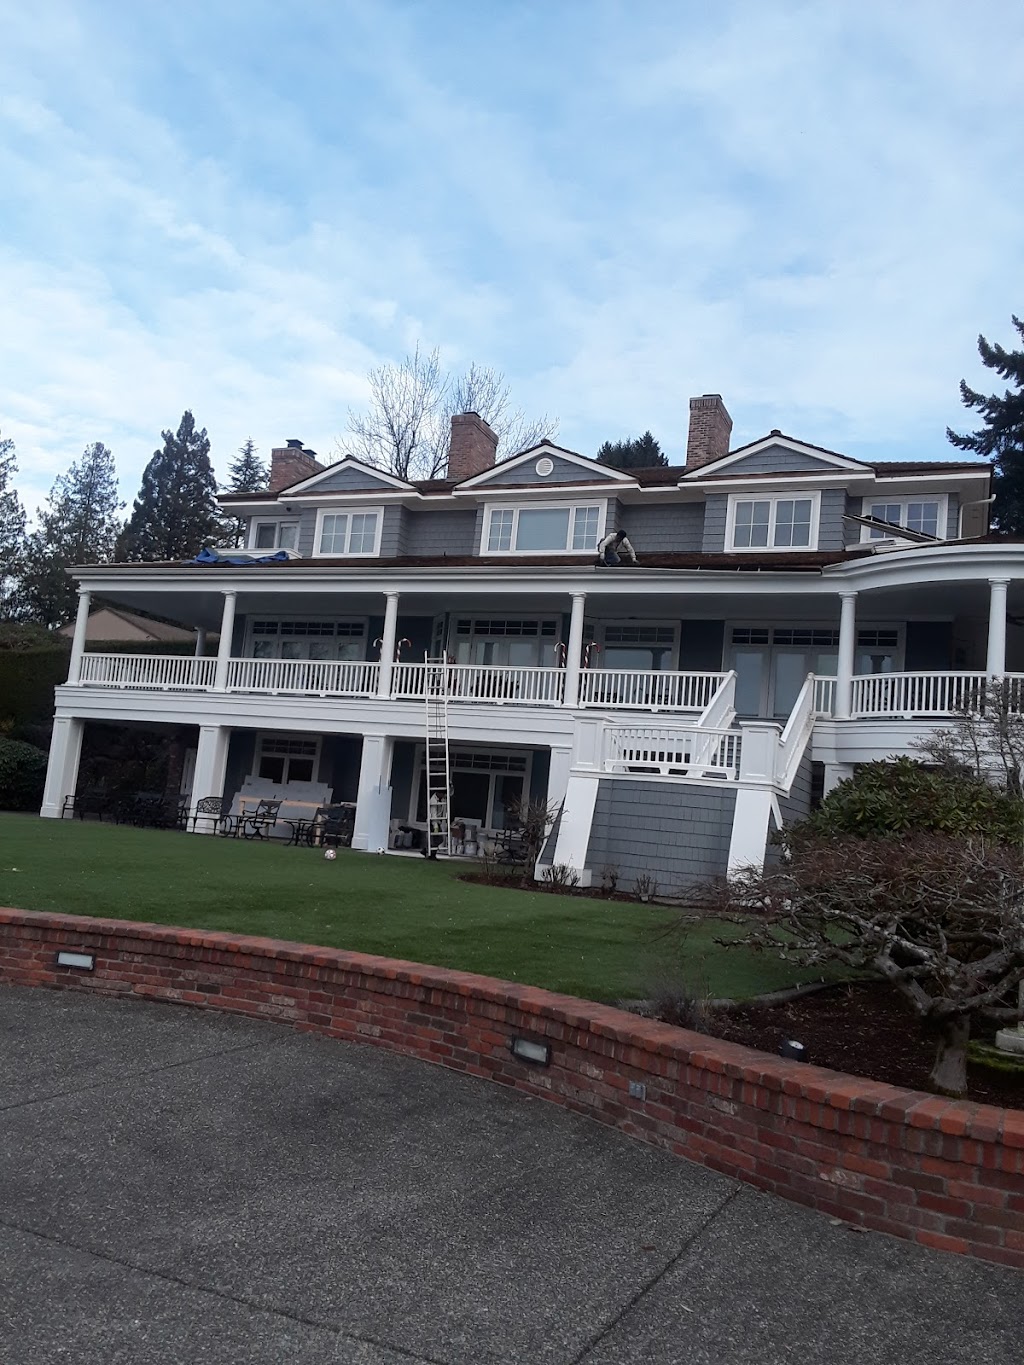 All Access Roofing & Gutters - roofing contractor  | Photo 10 of 10 | Address: 1626 175th Pl SE, Bothell, WA 98012, USA | Phone: (206) 775-0246